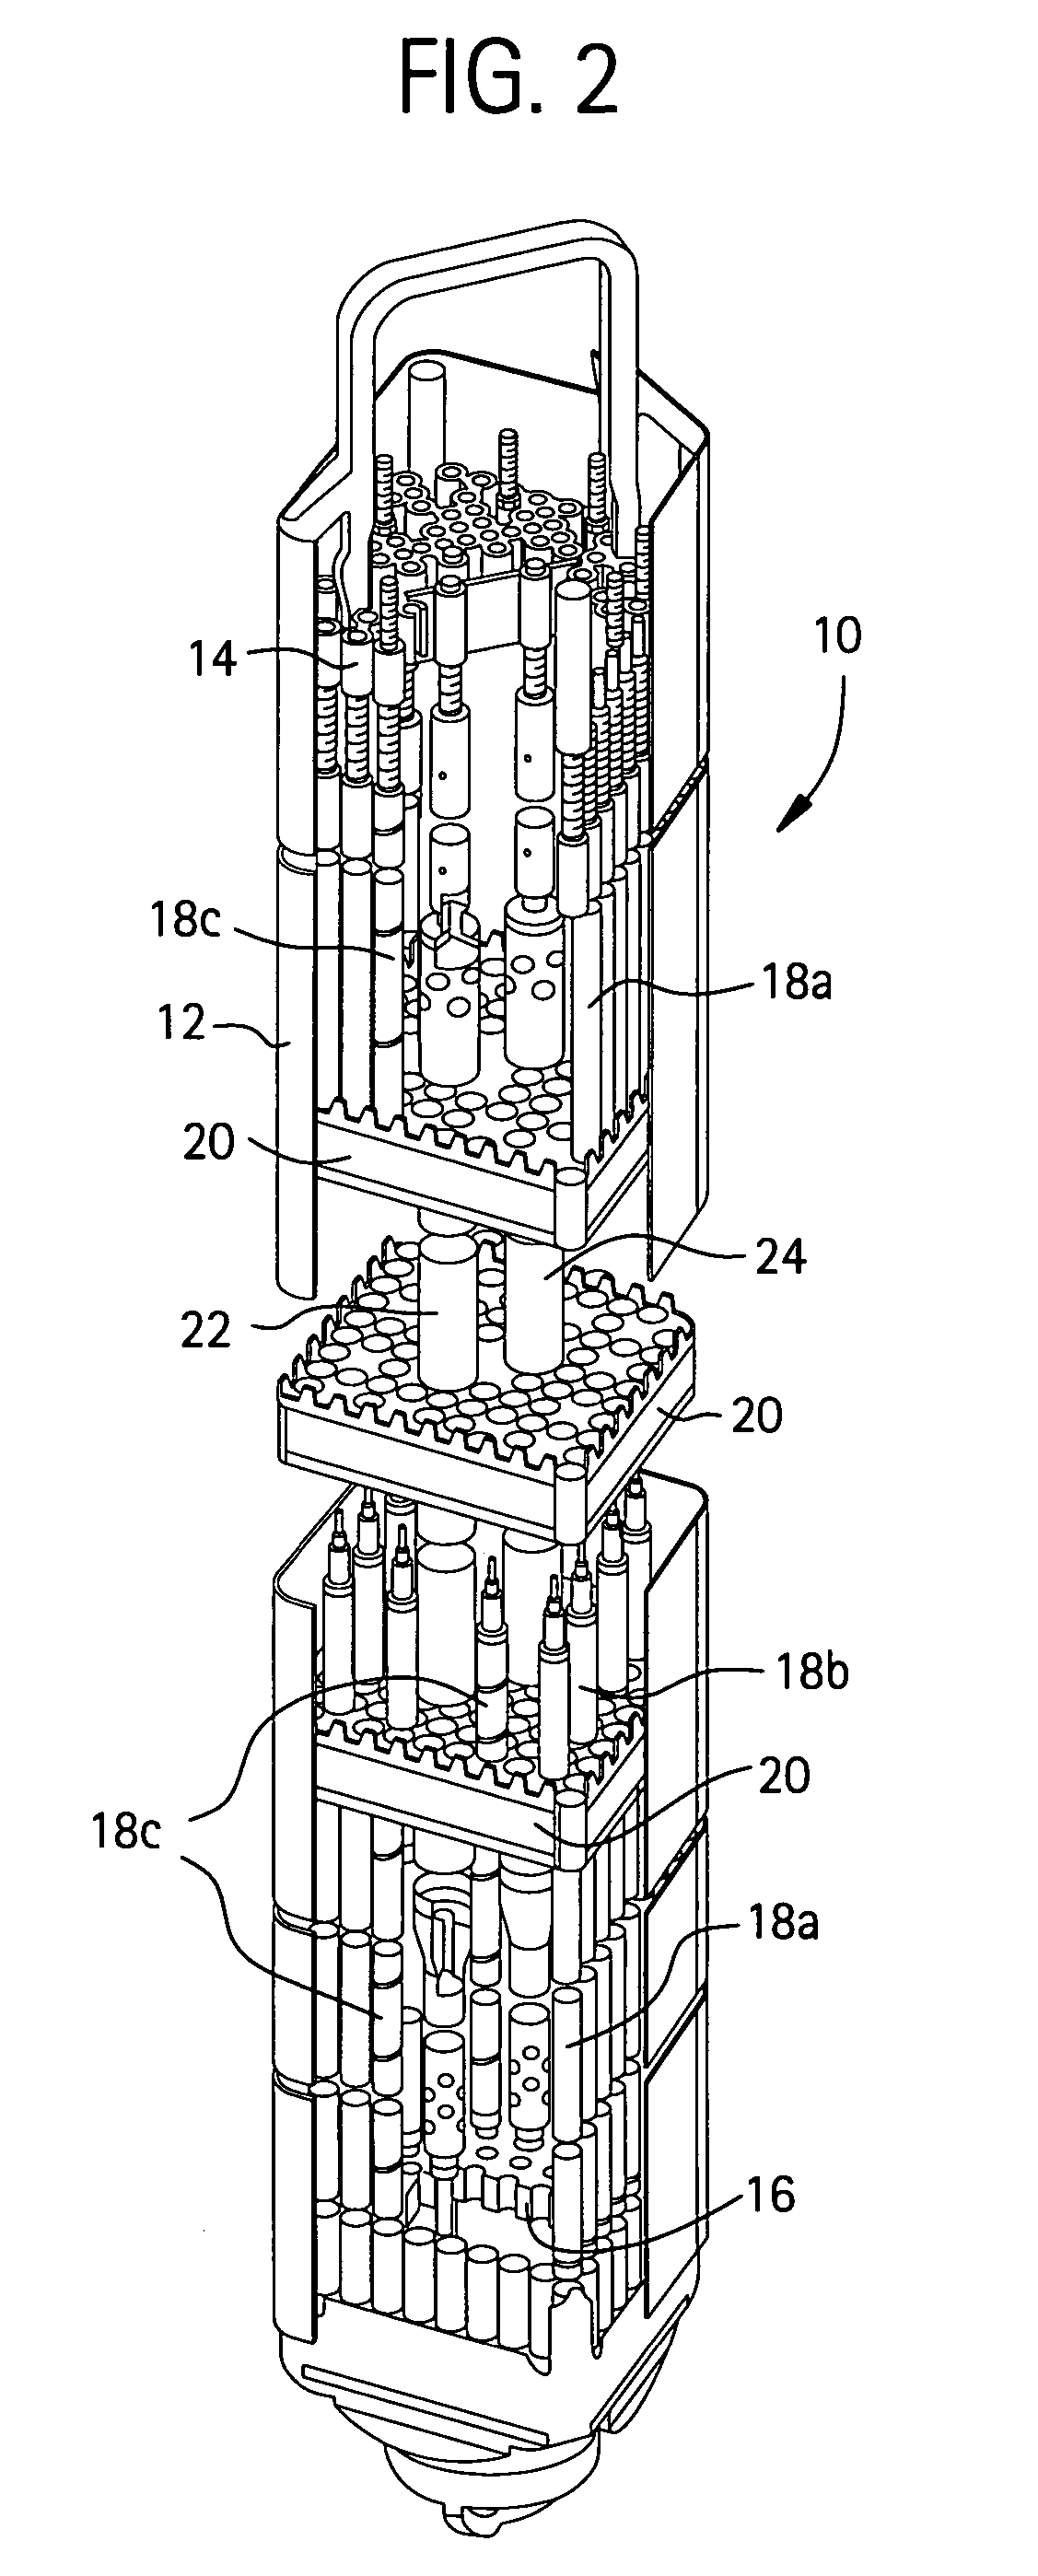 Method of producing isotopes in power nuclear reactors